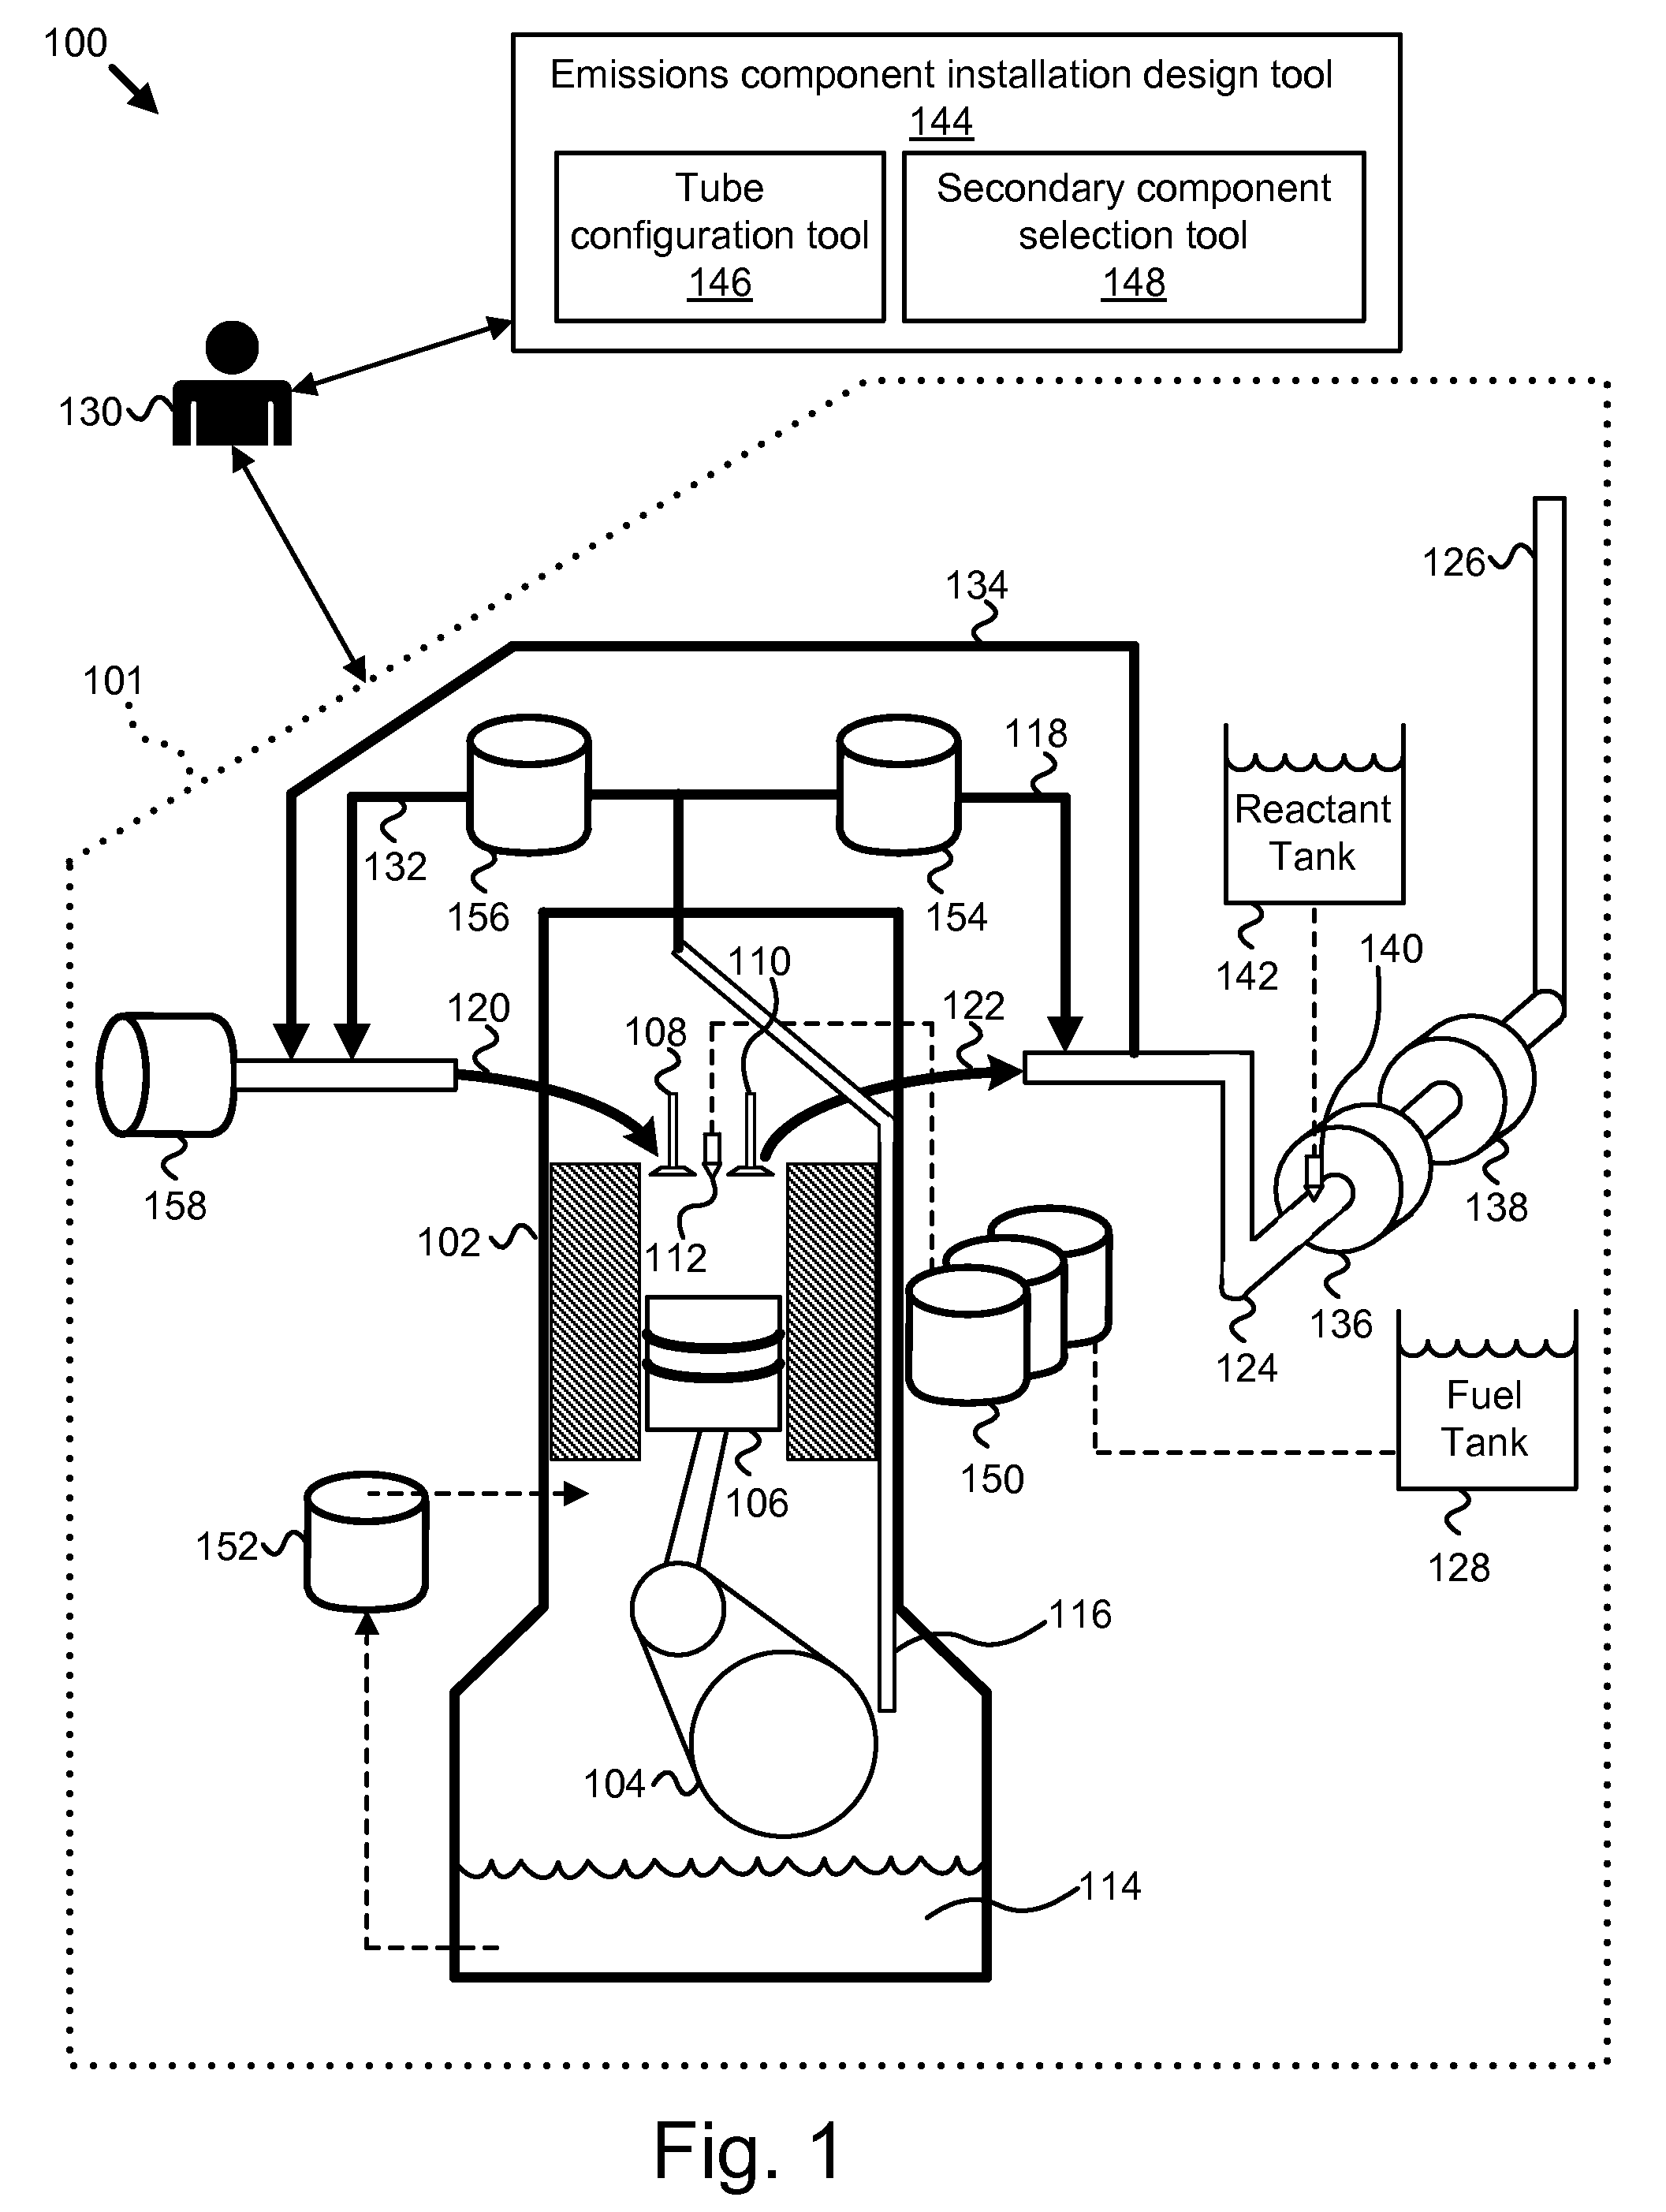 Apparatus, system, and method for rapid design of emissions component installations